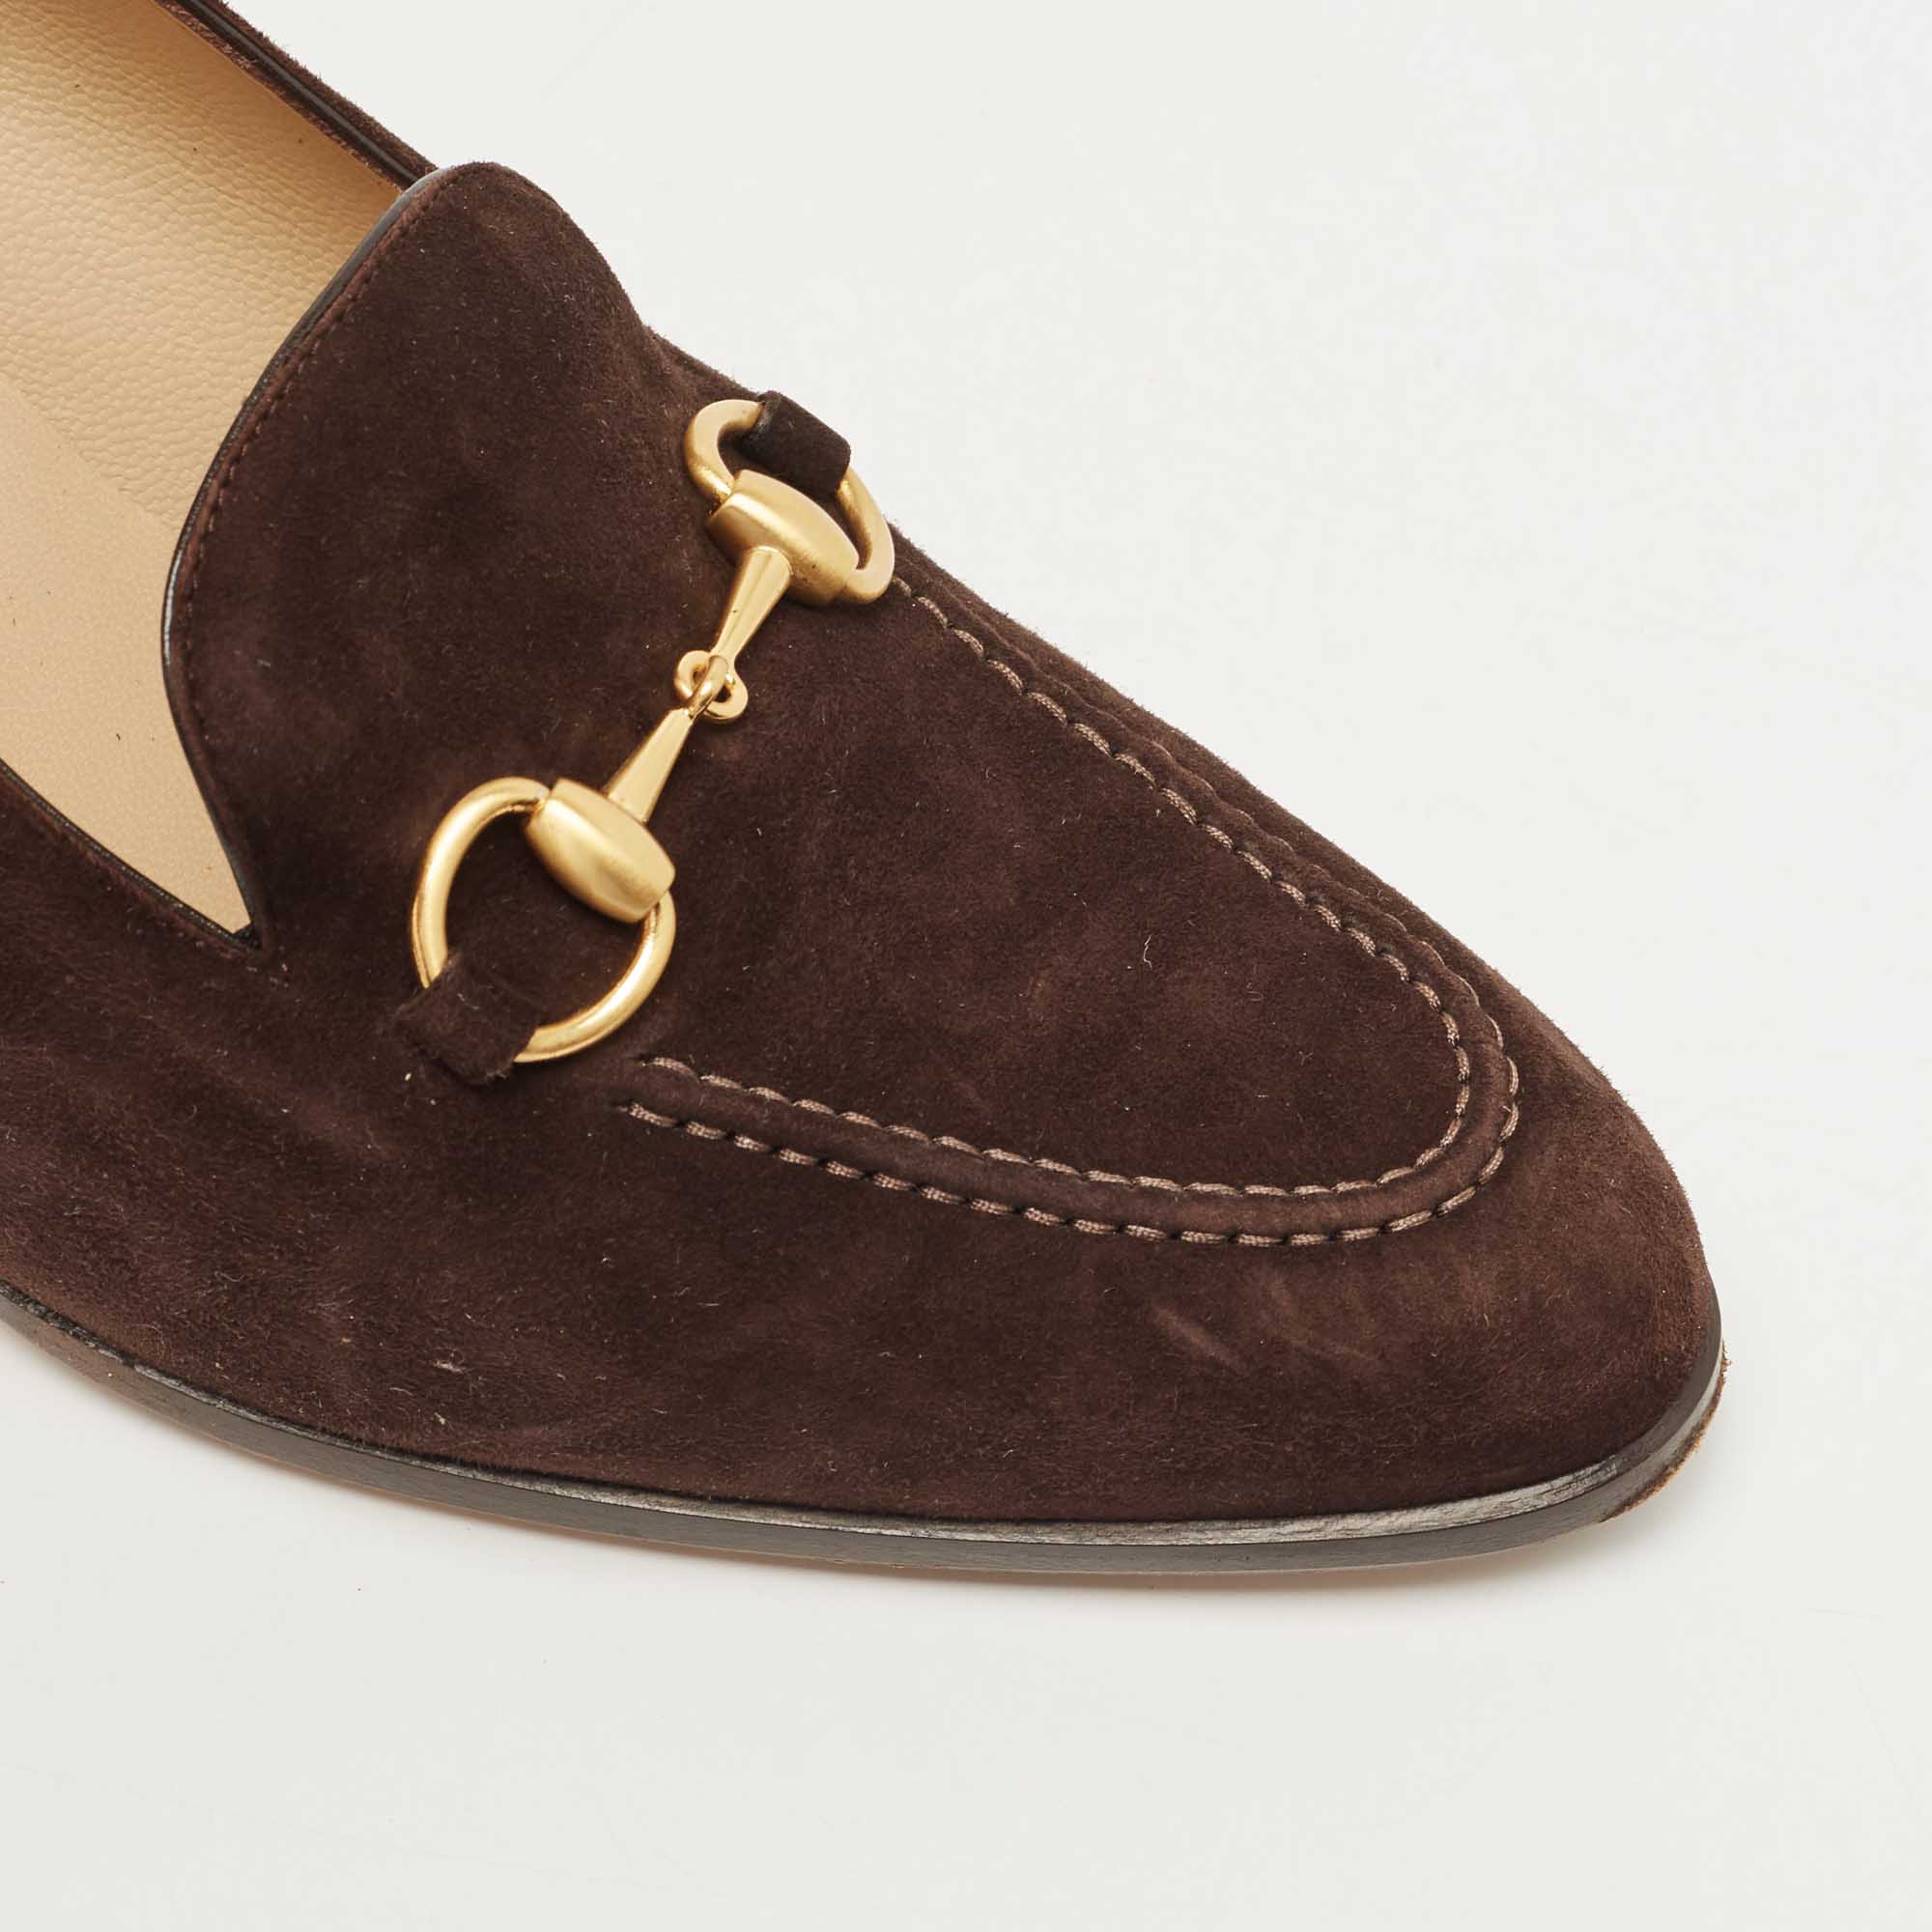 Gucci Brown  Suede Loafer Pumps Size 37.5